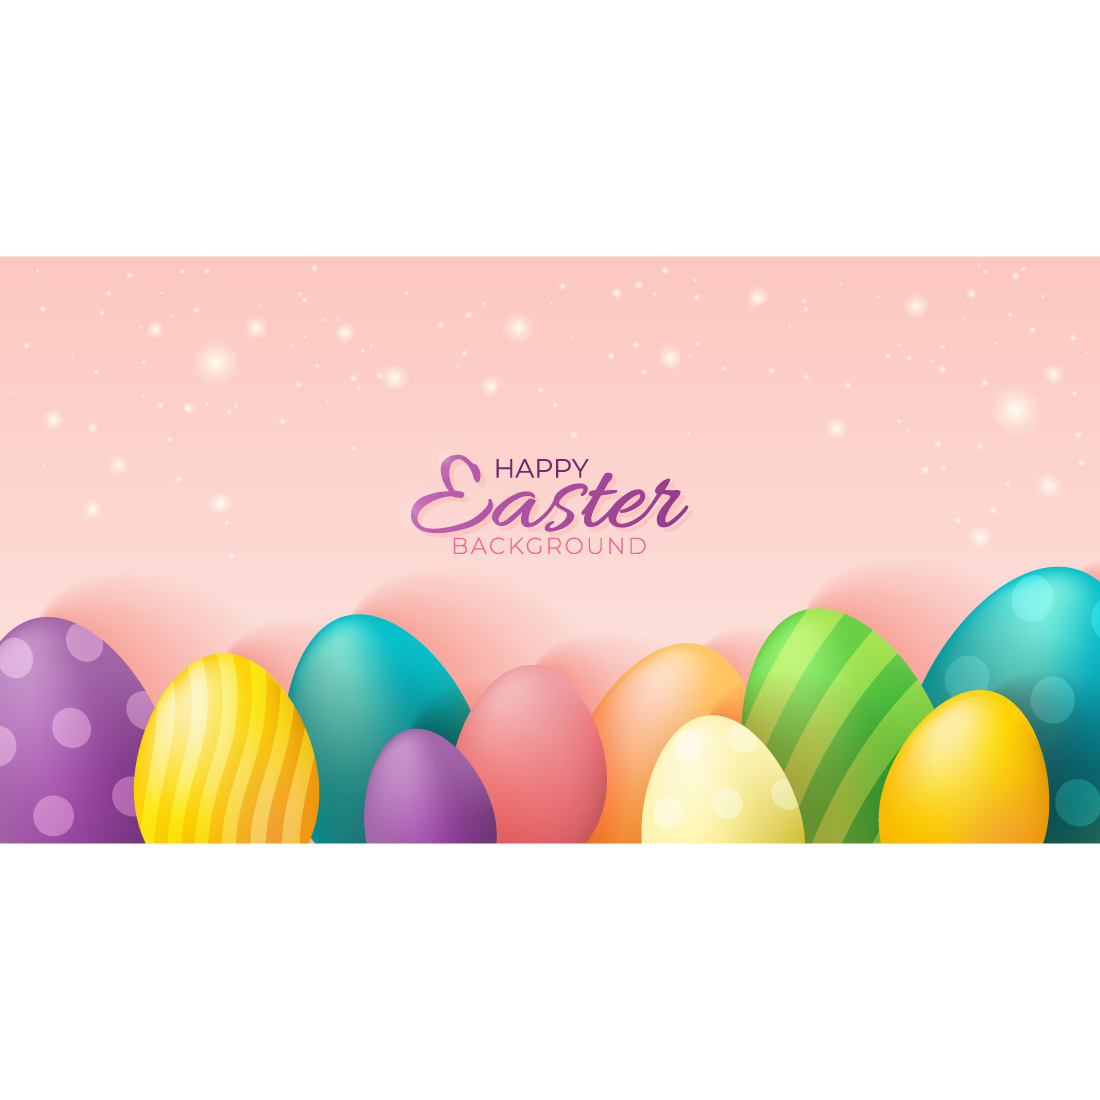 Happy Easter vector banners with cute bunny and eggs preview image.